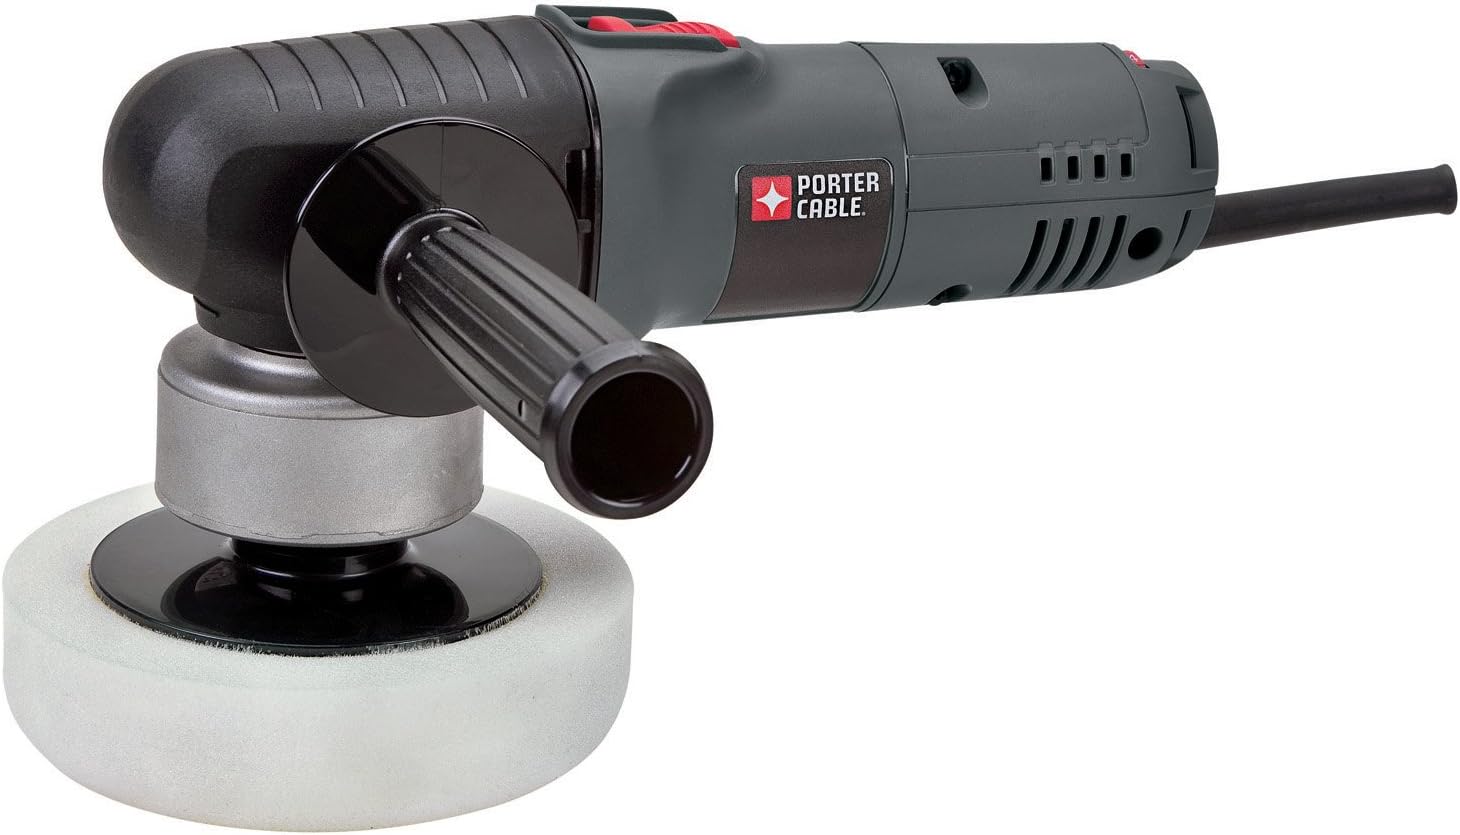 PORTER-CABLE Polisher, 6 Inch, 4.5 Amp, Speed Dial [...]